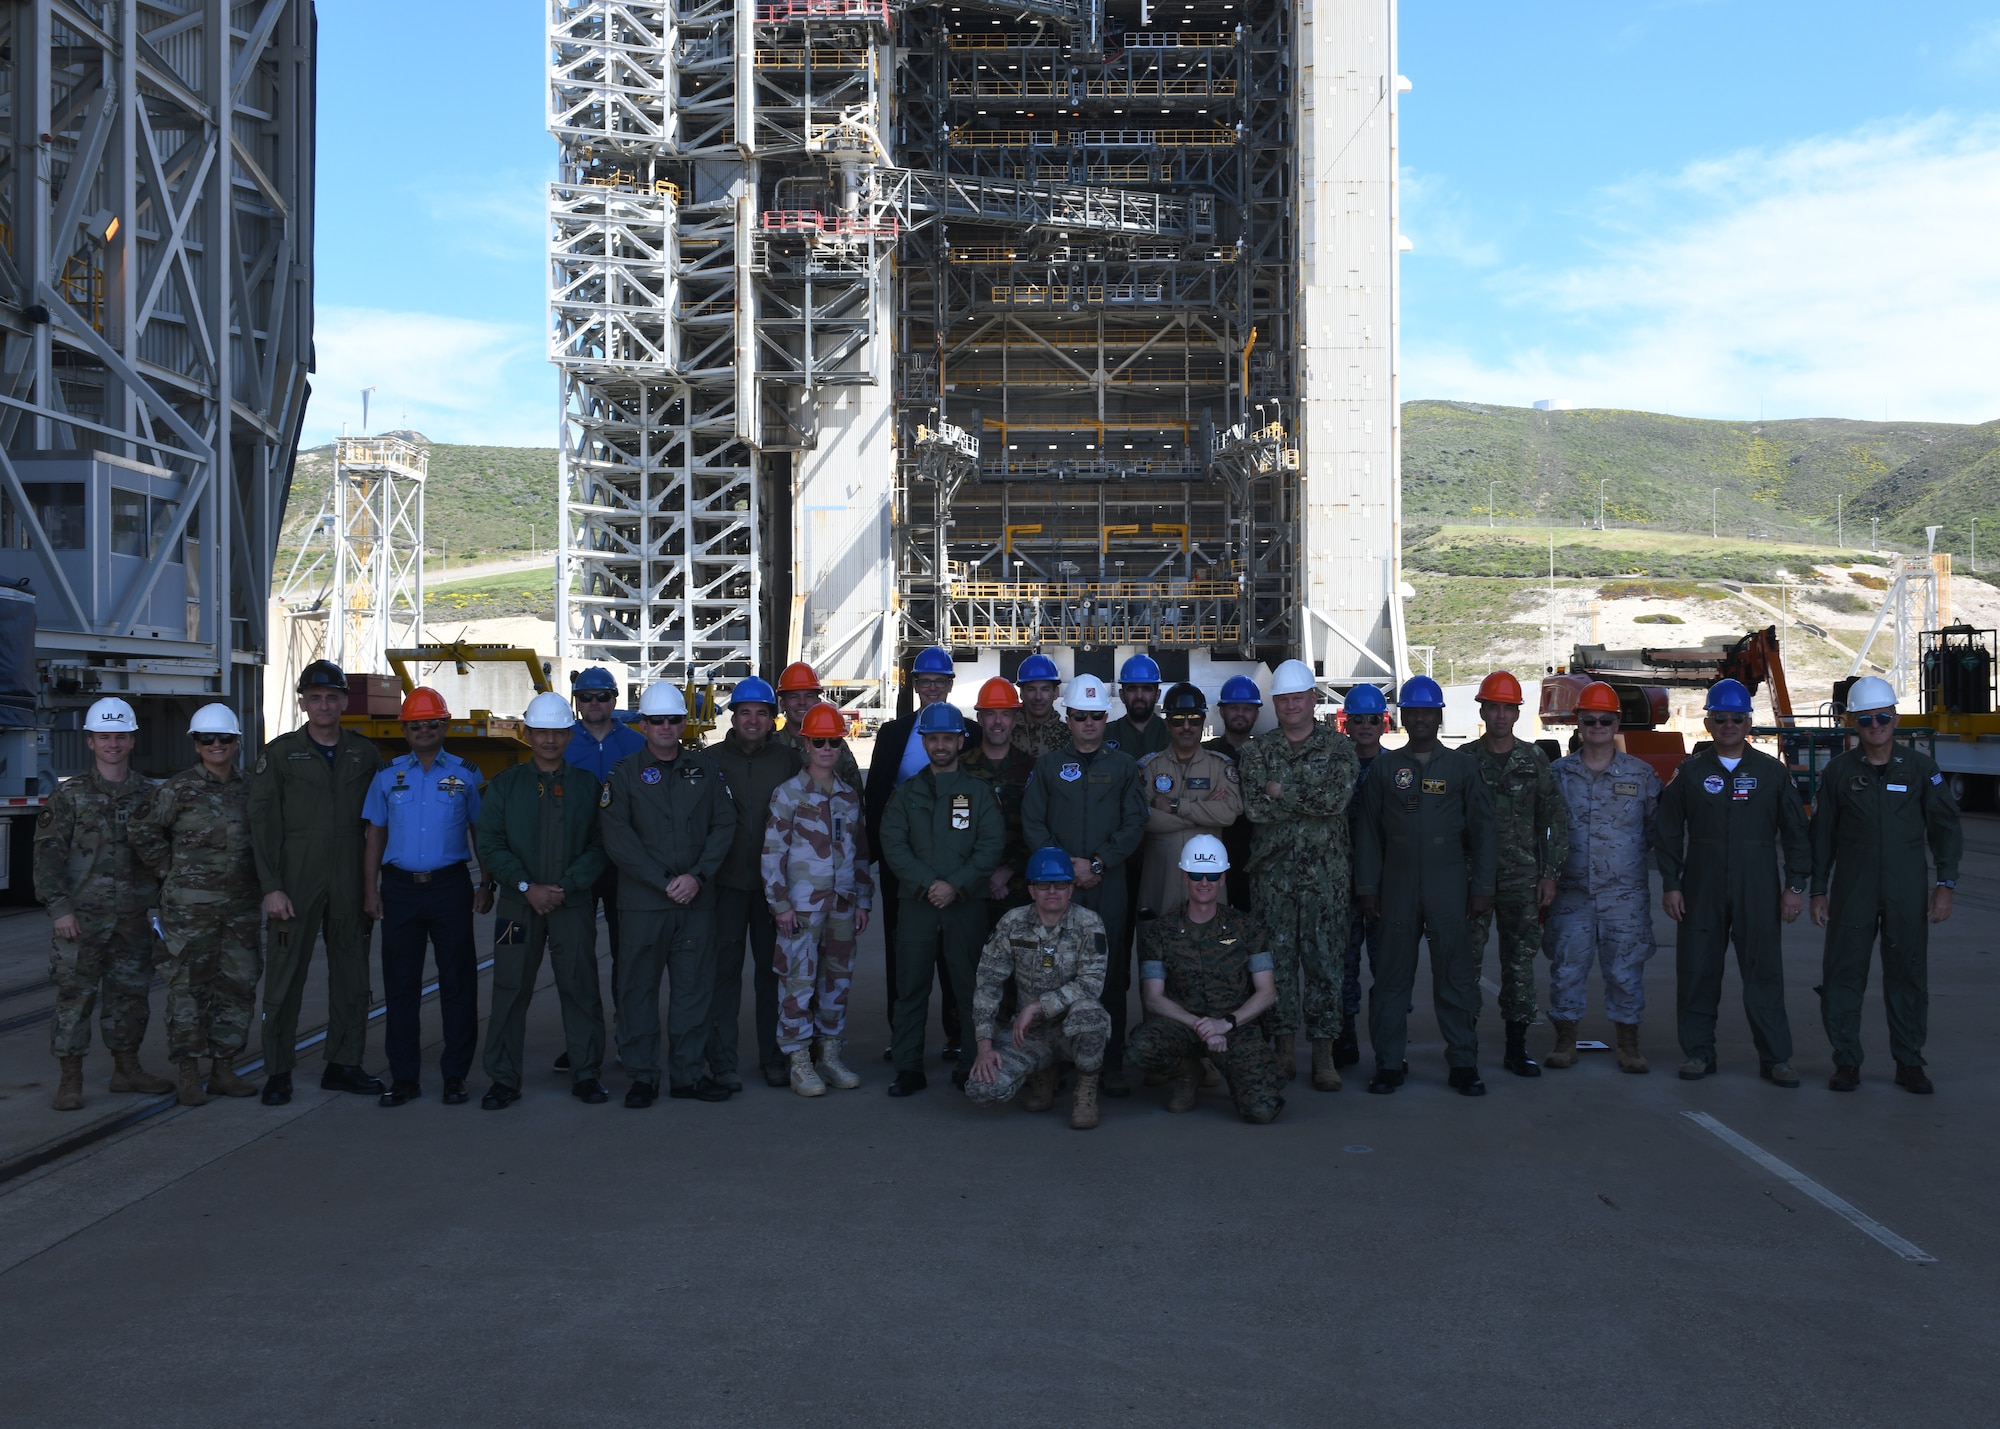 Members of the Air War College group together for a photo in front of Space Launch Complex 6 on Vandenberg Space Force Base, Calif., March 14, 2022. Officers from 21 different nations visited Vandenberg to get familiarized with combined space operations and what challenges, concerns, and opportunities they bring. (U.S. Space Force photo by Airman 1st Class Ryan Quijas)